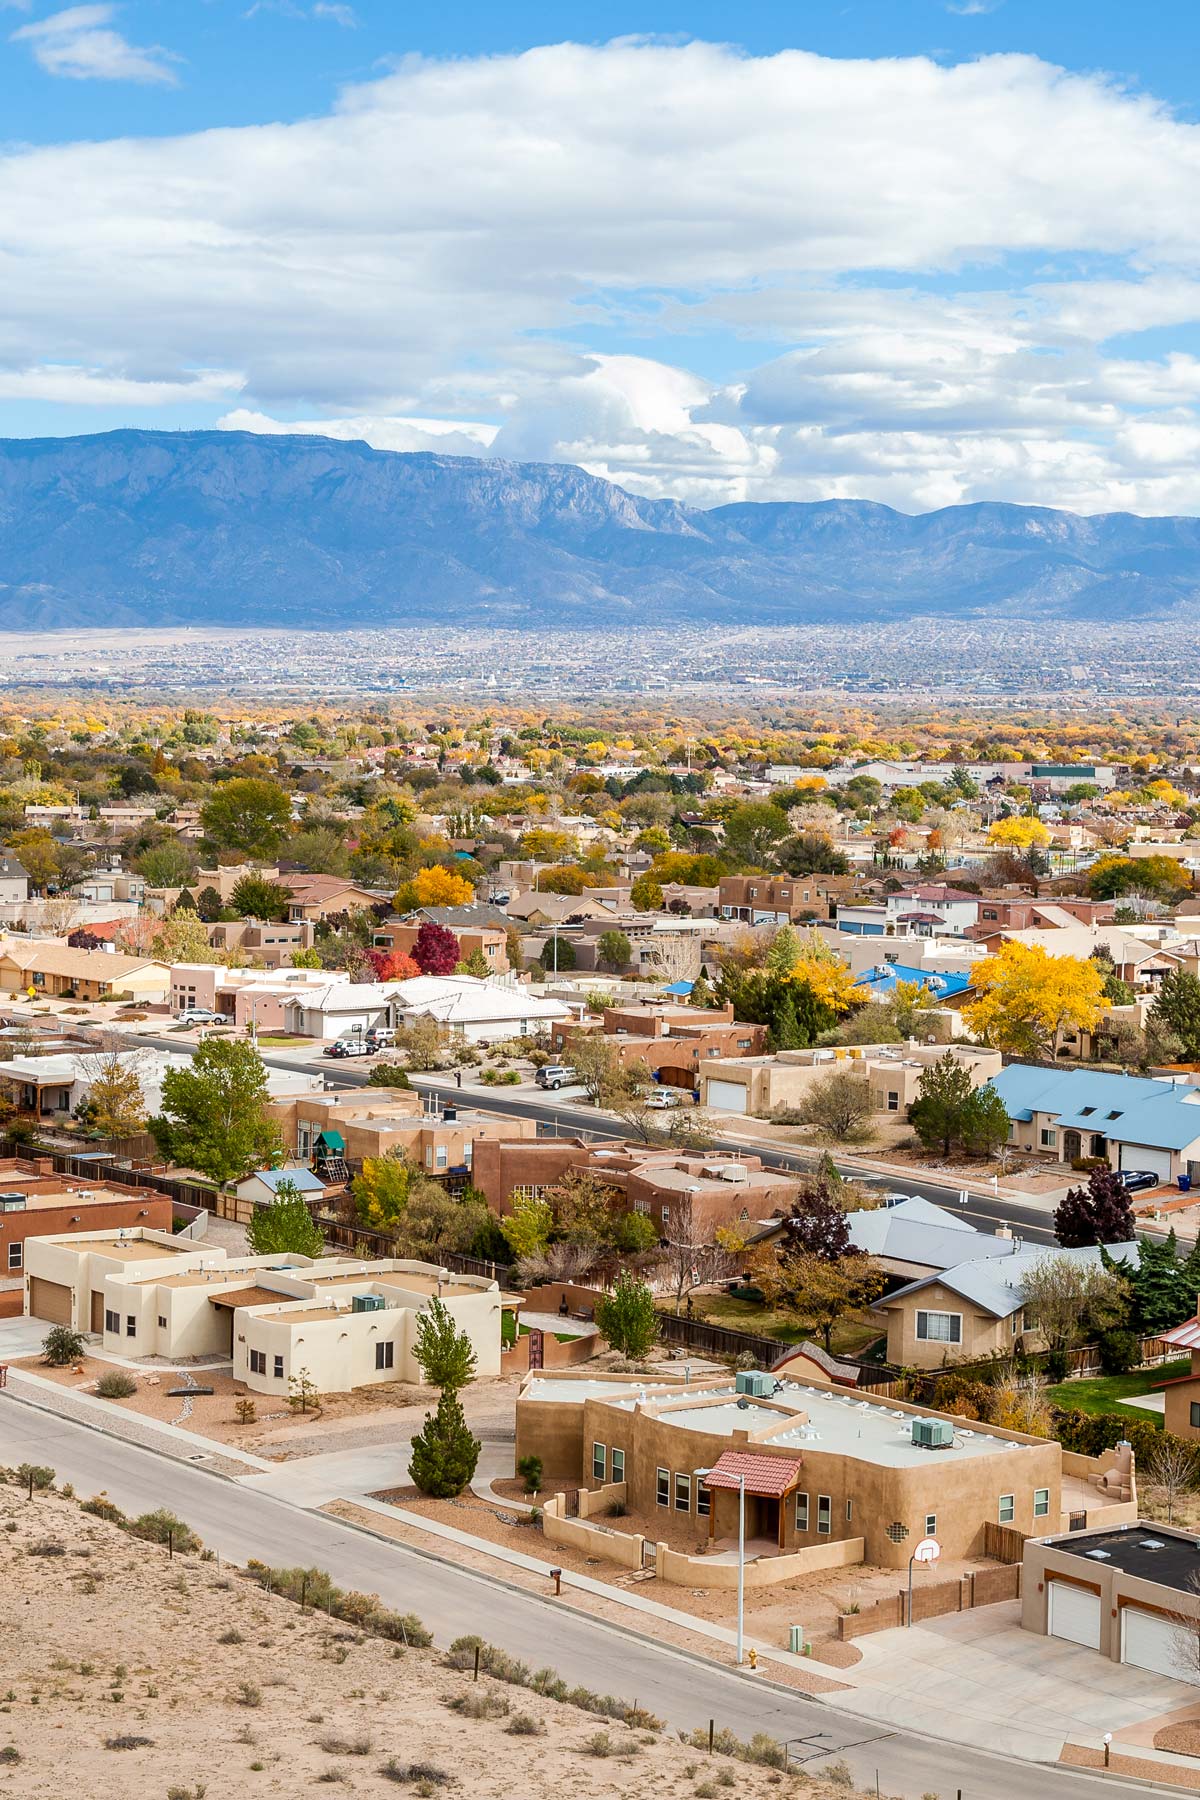 22 HONEST Pros &amp; Cons of Living in New Mexico (Let’s
Talk)